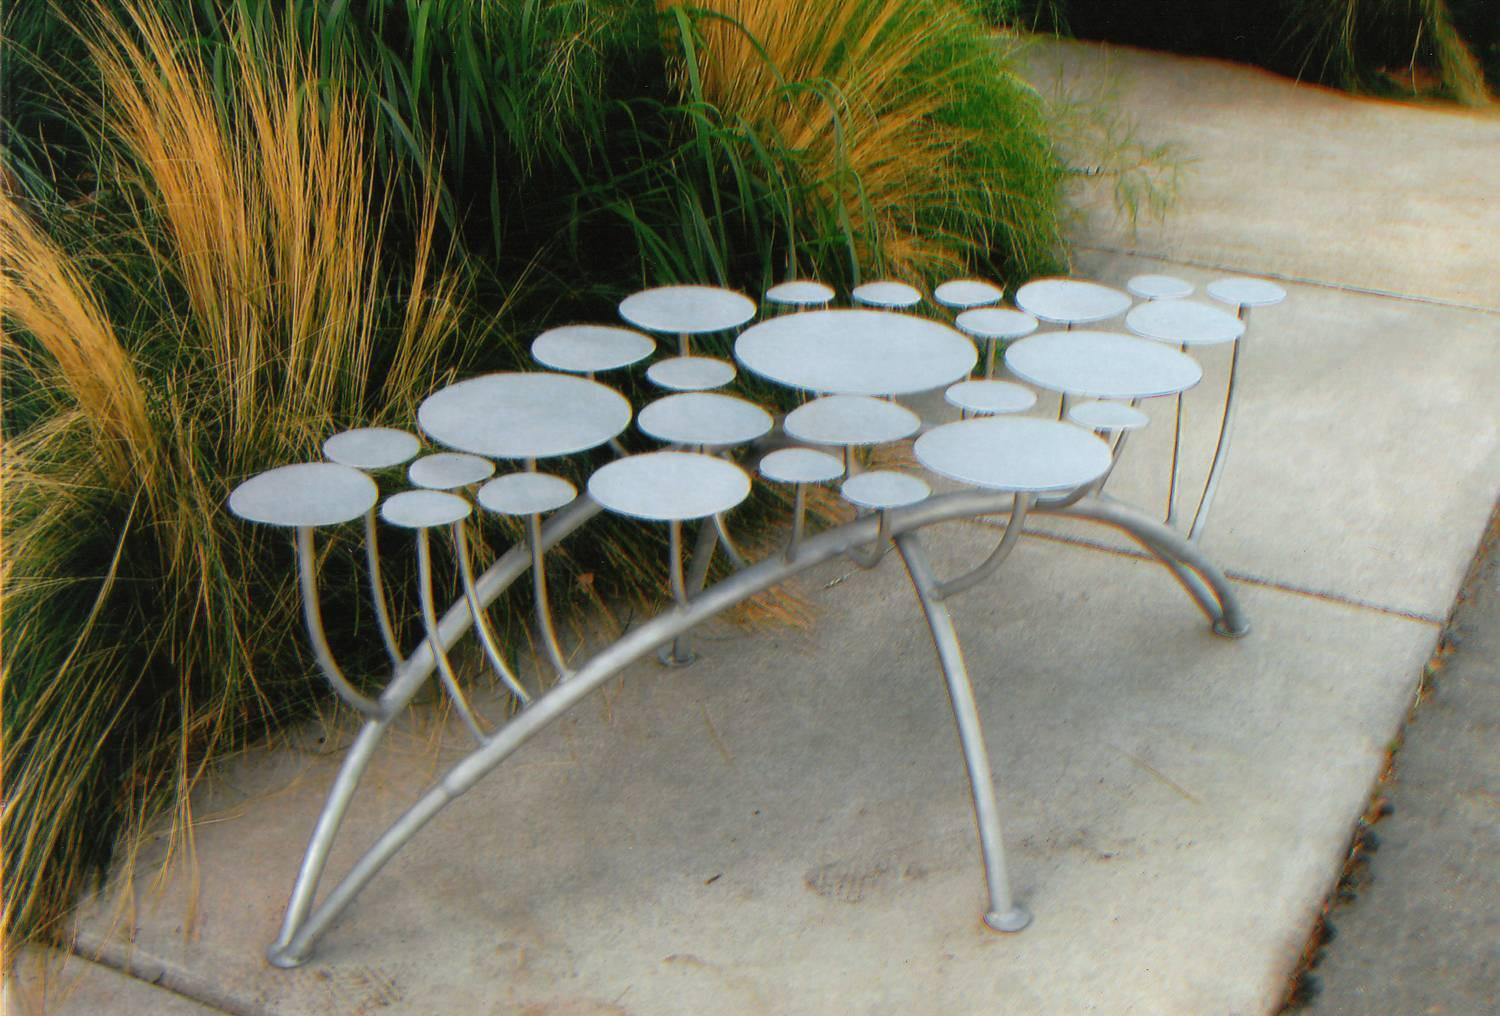 This unique backless bench designed and built by California artist Mark Oldland has a diamond-shaped seat made of 27 individual stainless steel disks attached to curved stainless steel legs. The bench can be placed indoors or outdoors and makes